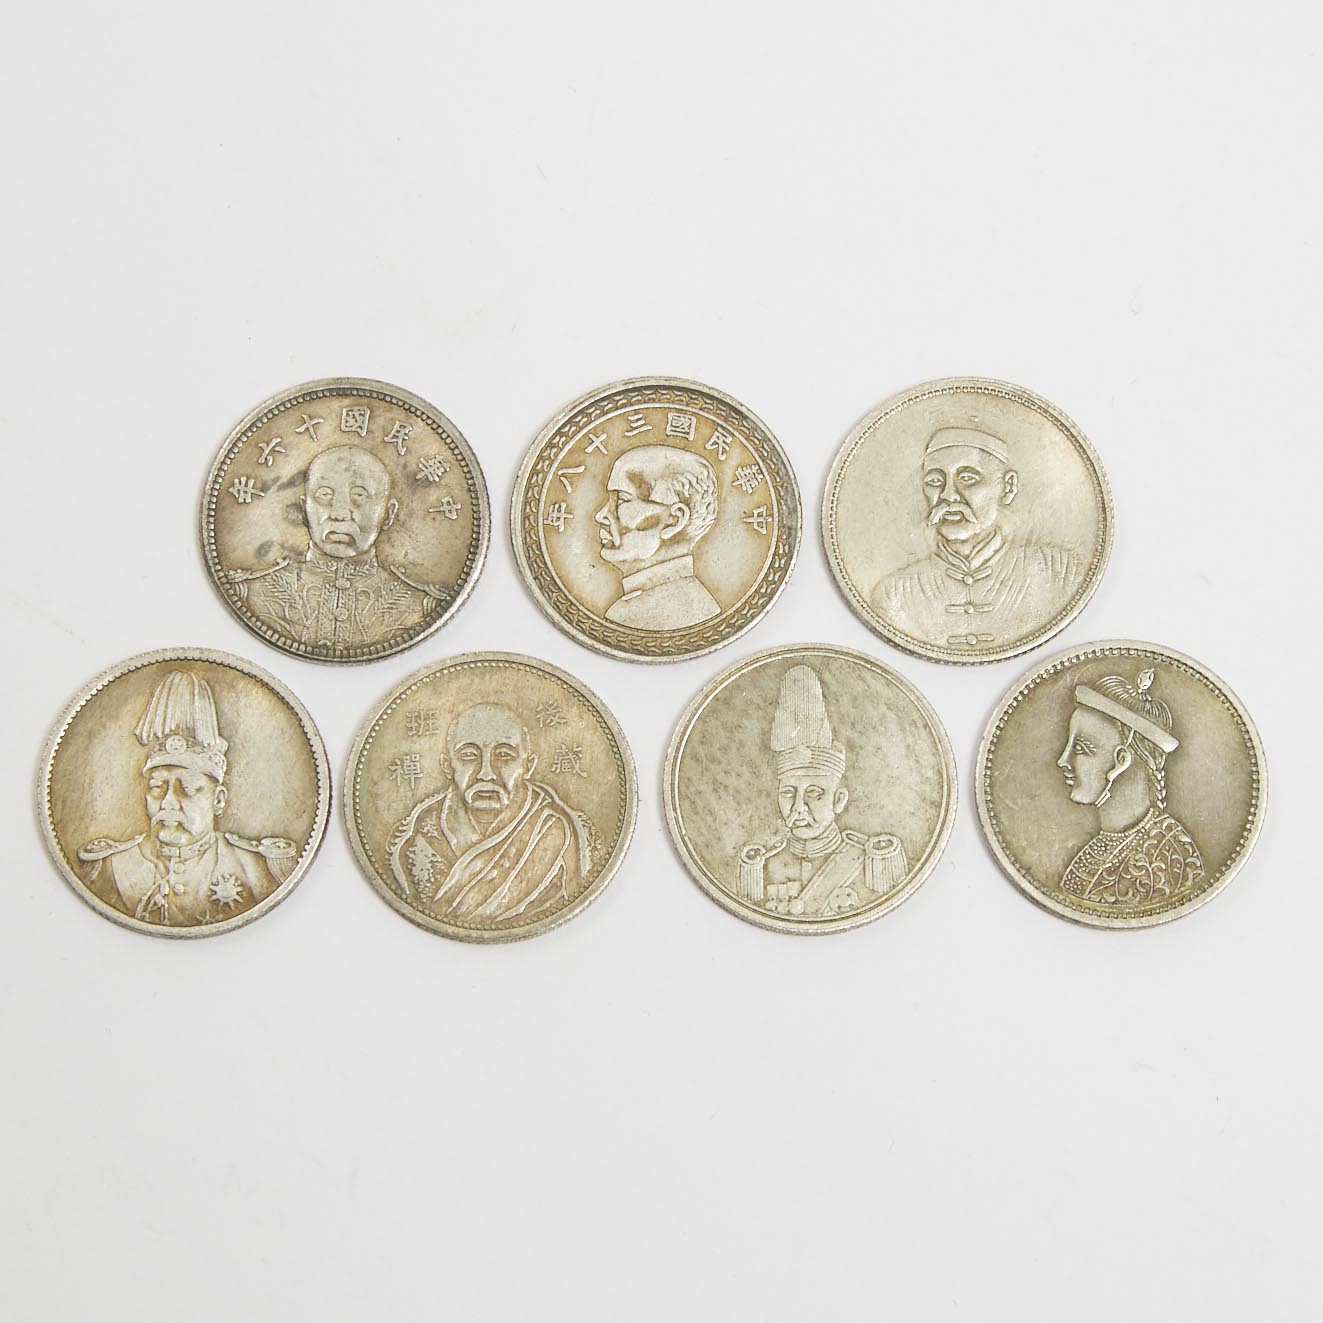 Seven Chinese Silver Coins, Late